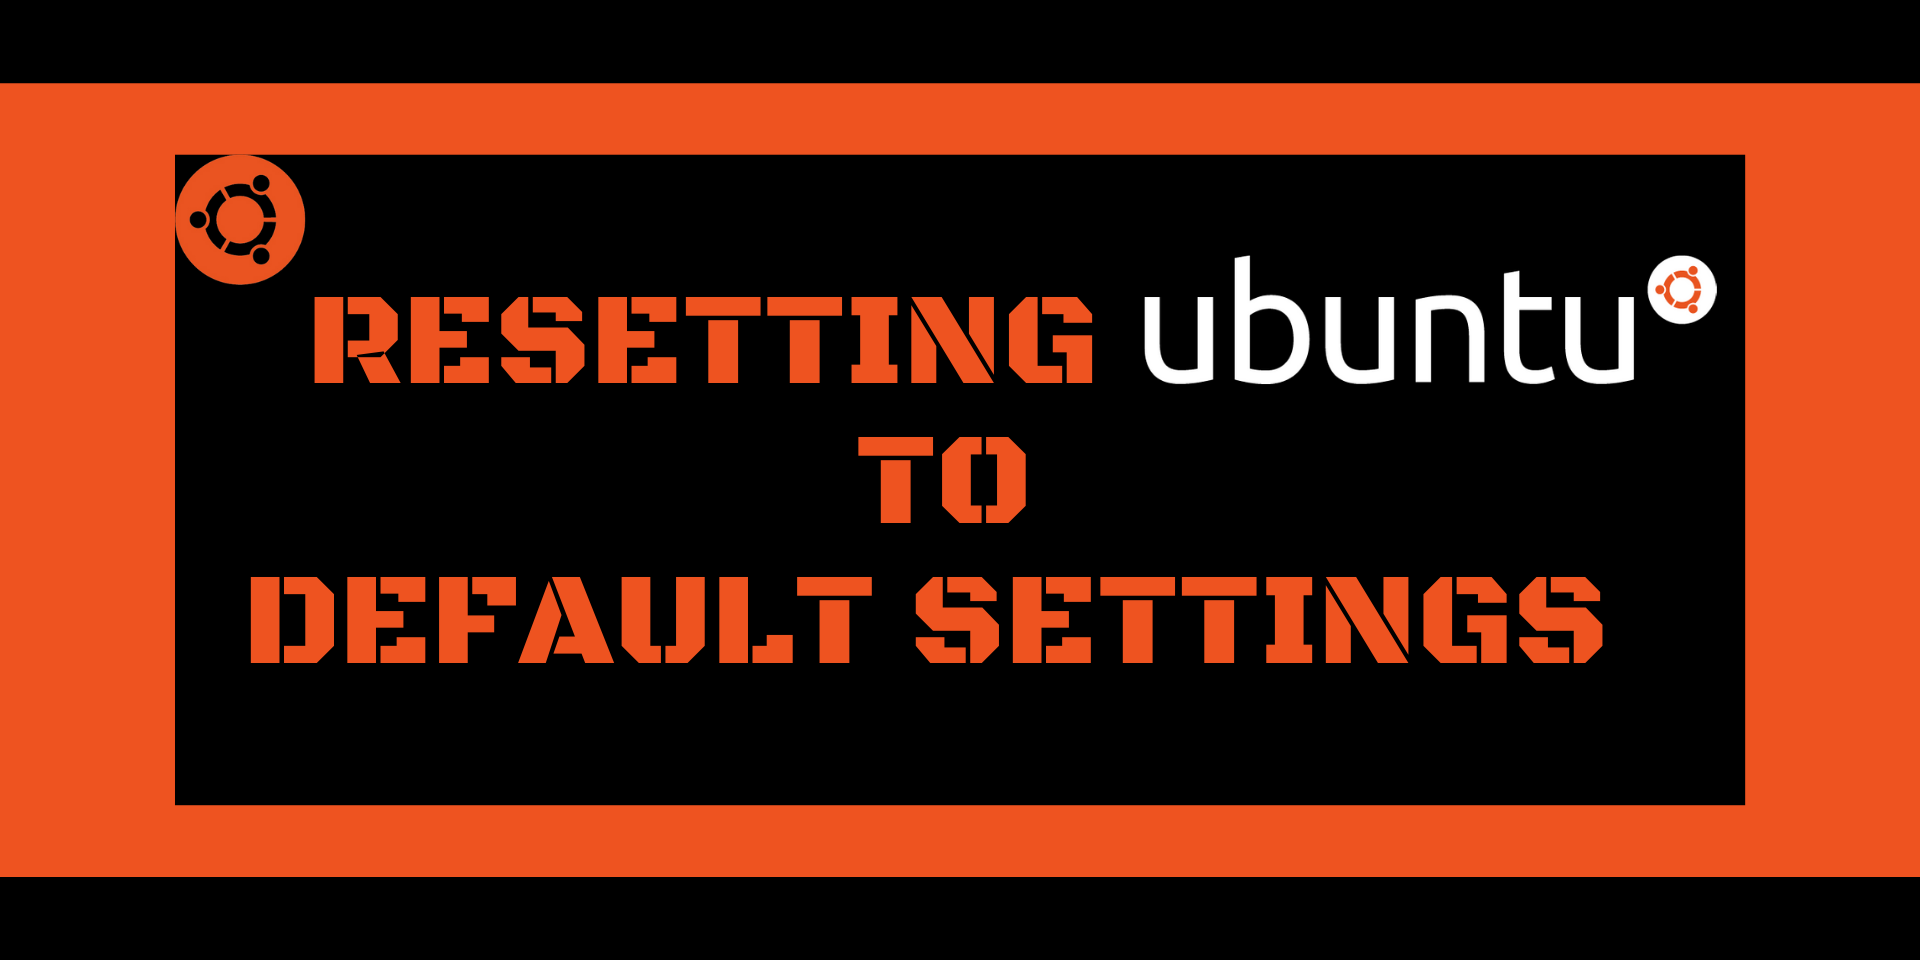 How to reset Ubuntu to default settings? (With easy steps